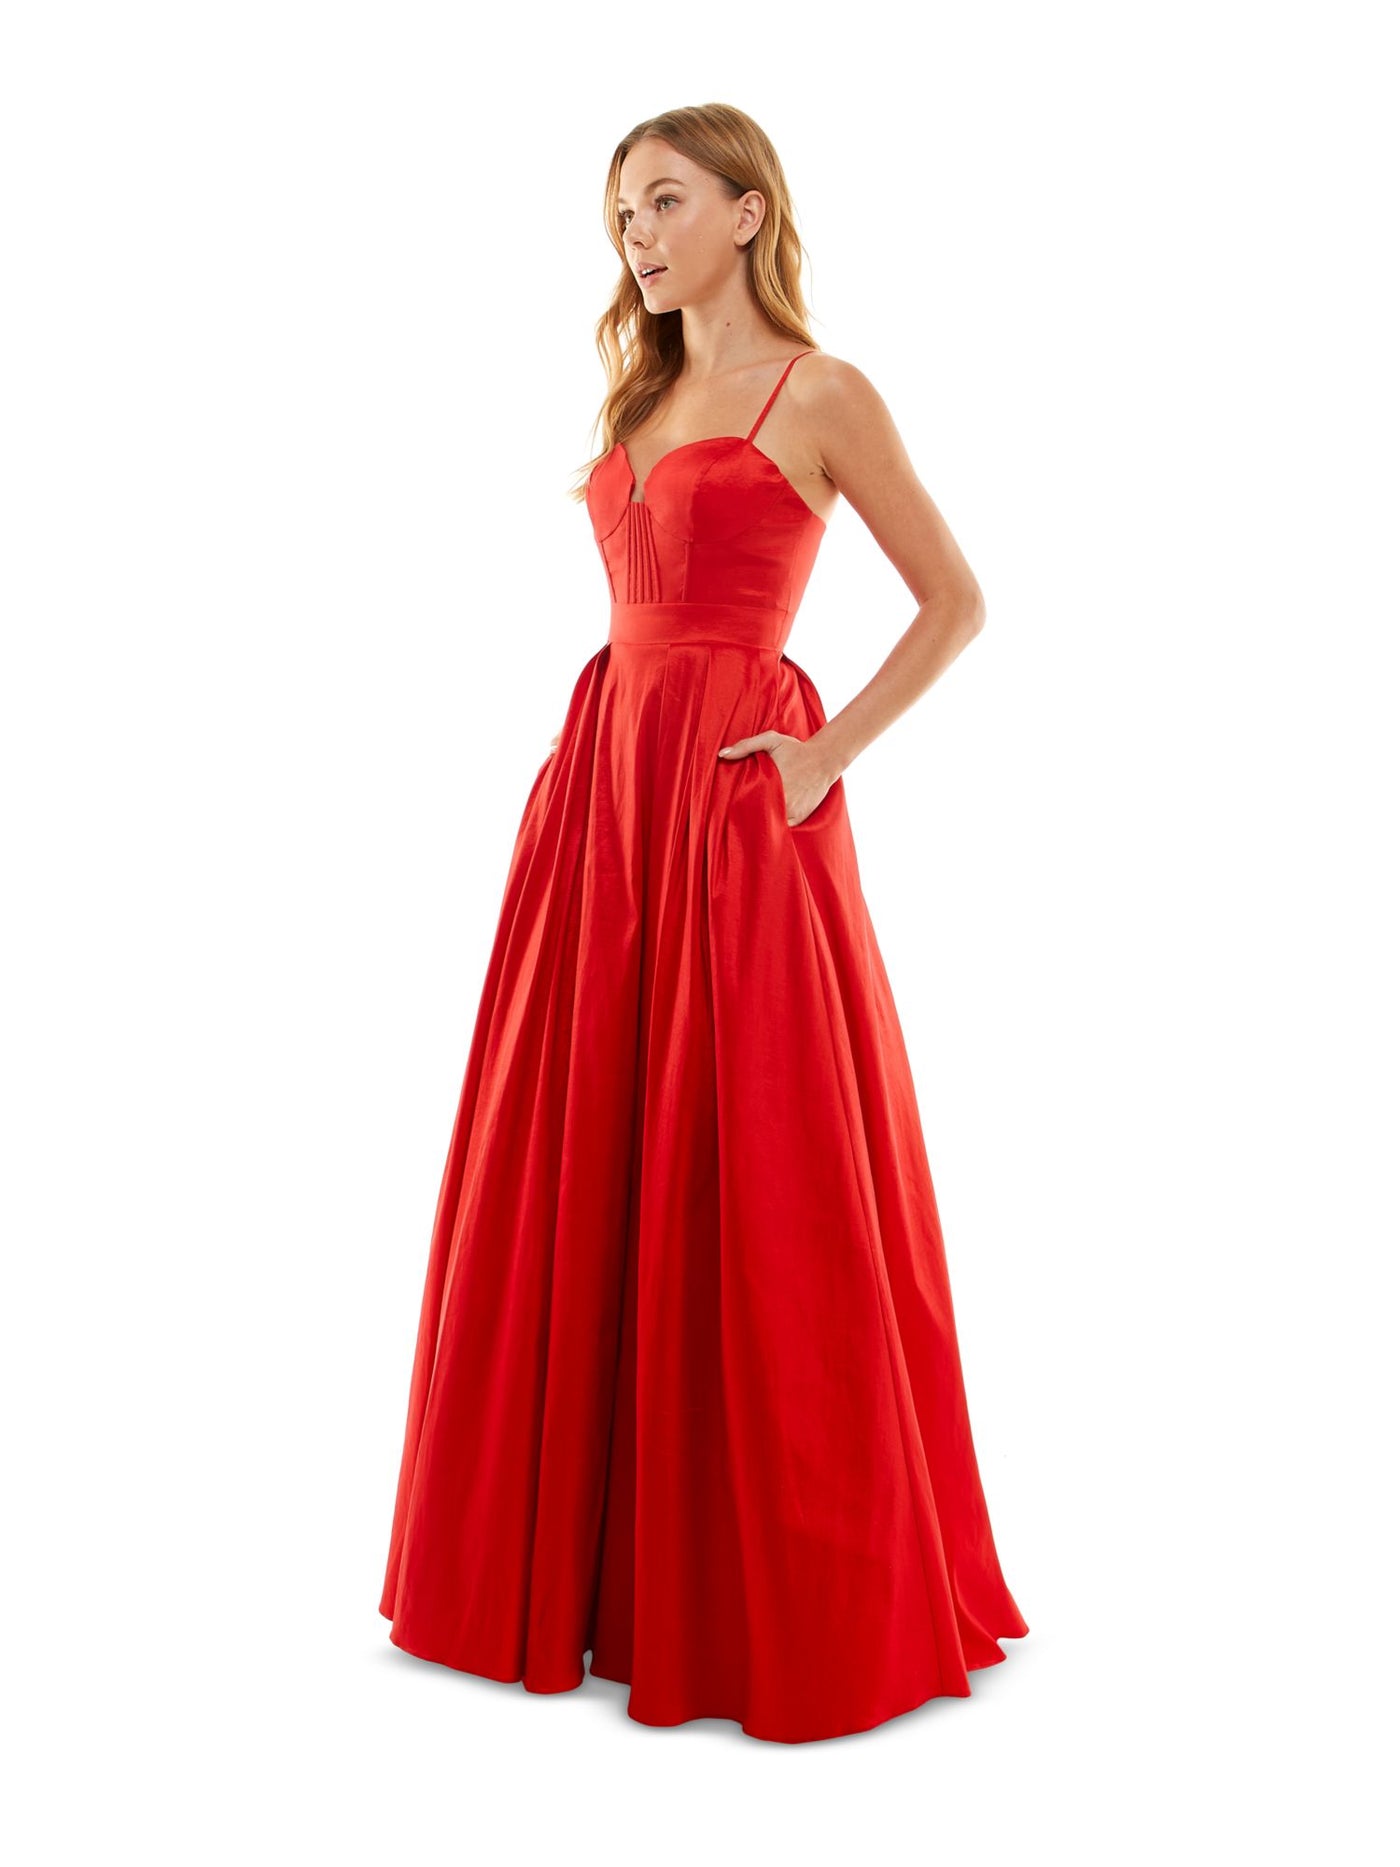 B DARLIN Womens Red Zippered Pleated Boned Corset Pocketed Lined Spaghetti Strap Sweetheart Neckline Full-Length Prom Gown Dress Juniors 5\6